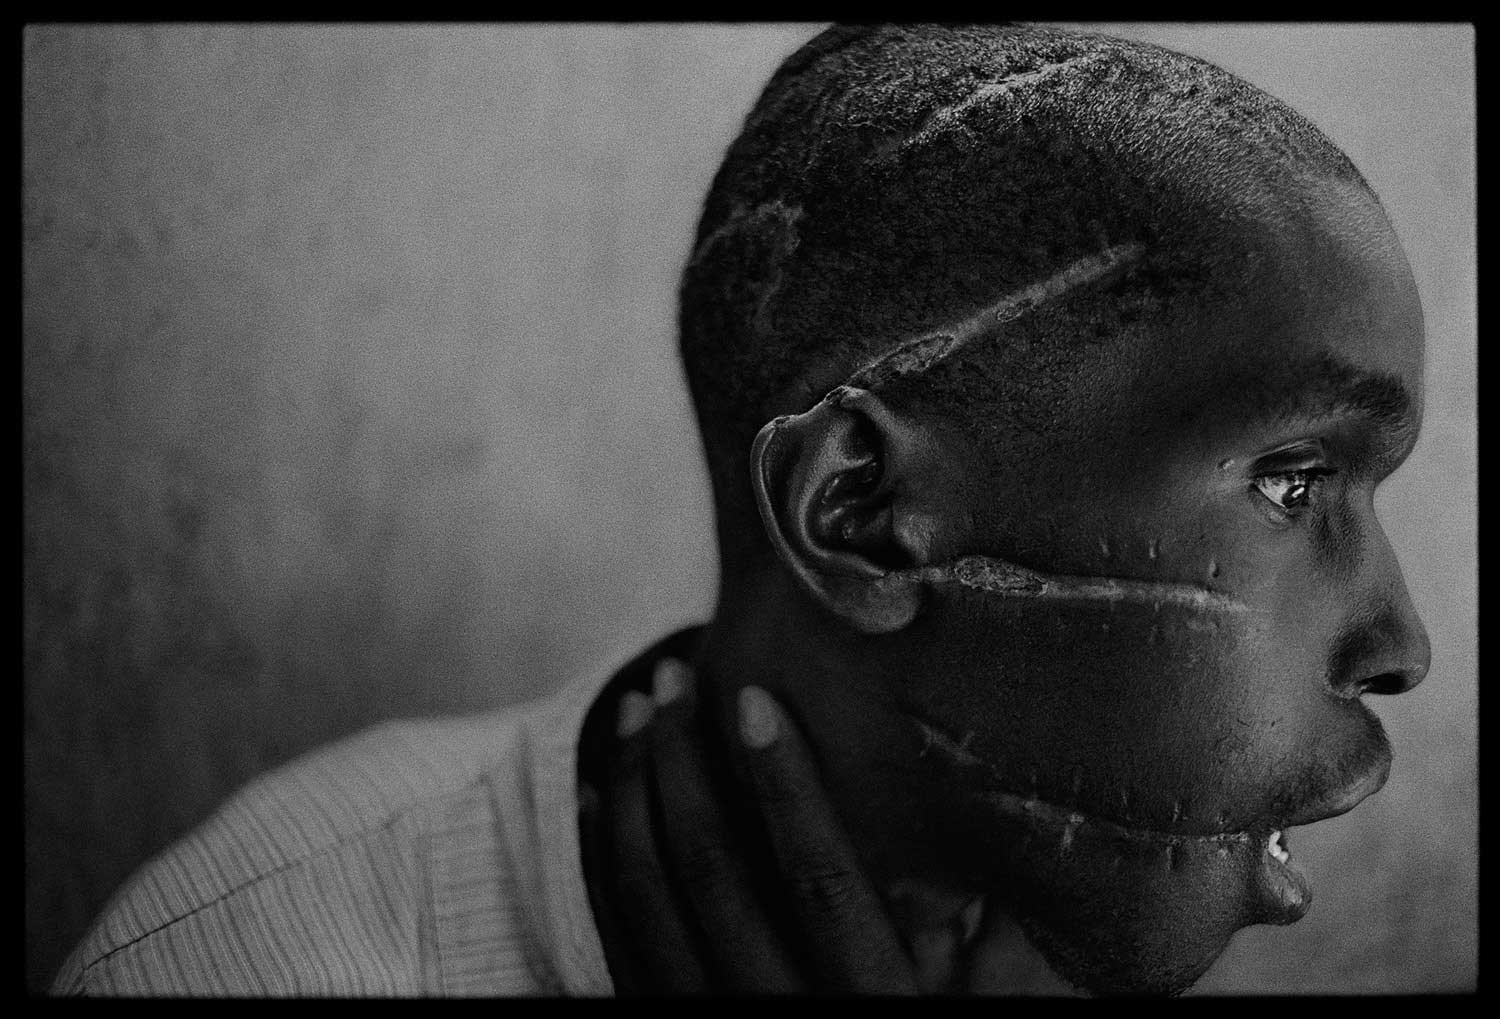 A Hutu man who did not support the genocide had been imprisoned in the concentration camp, starved and attacked with machetes. He managed to survive after he was freed and was placed in the care of the Red Cross, Rwanda, 1994.